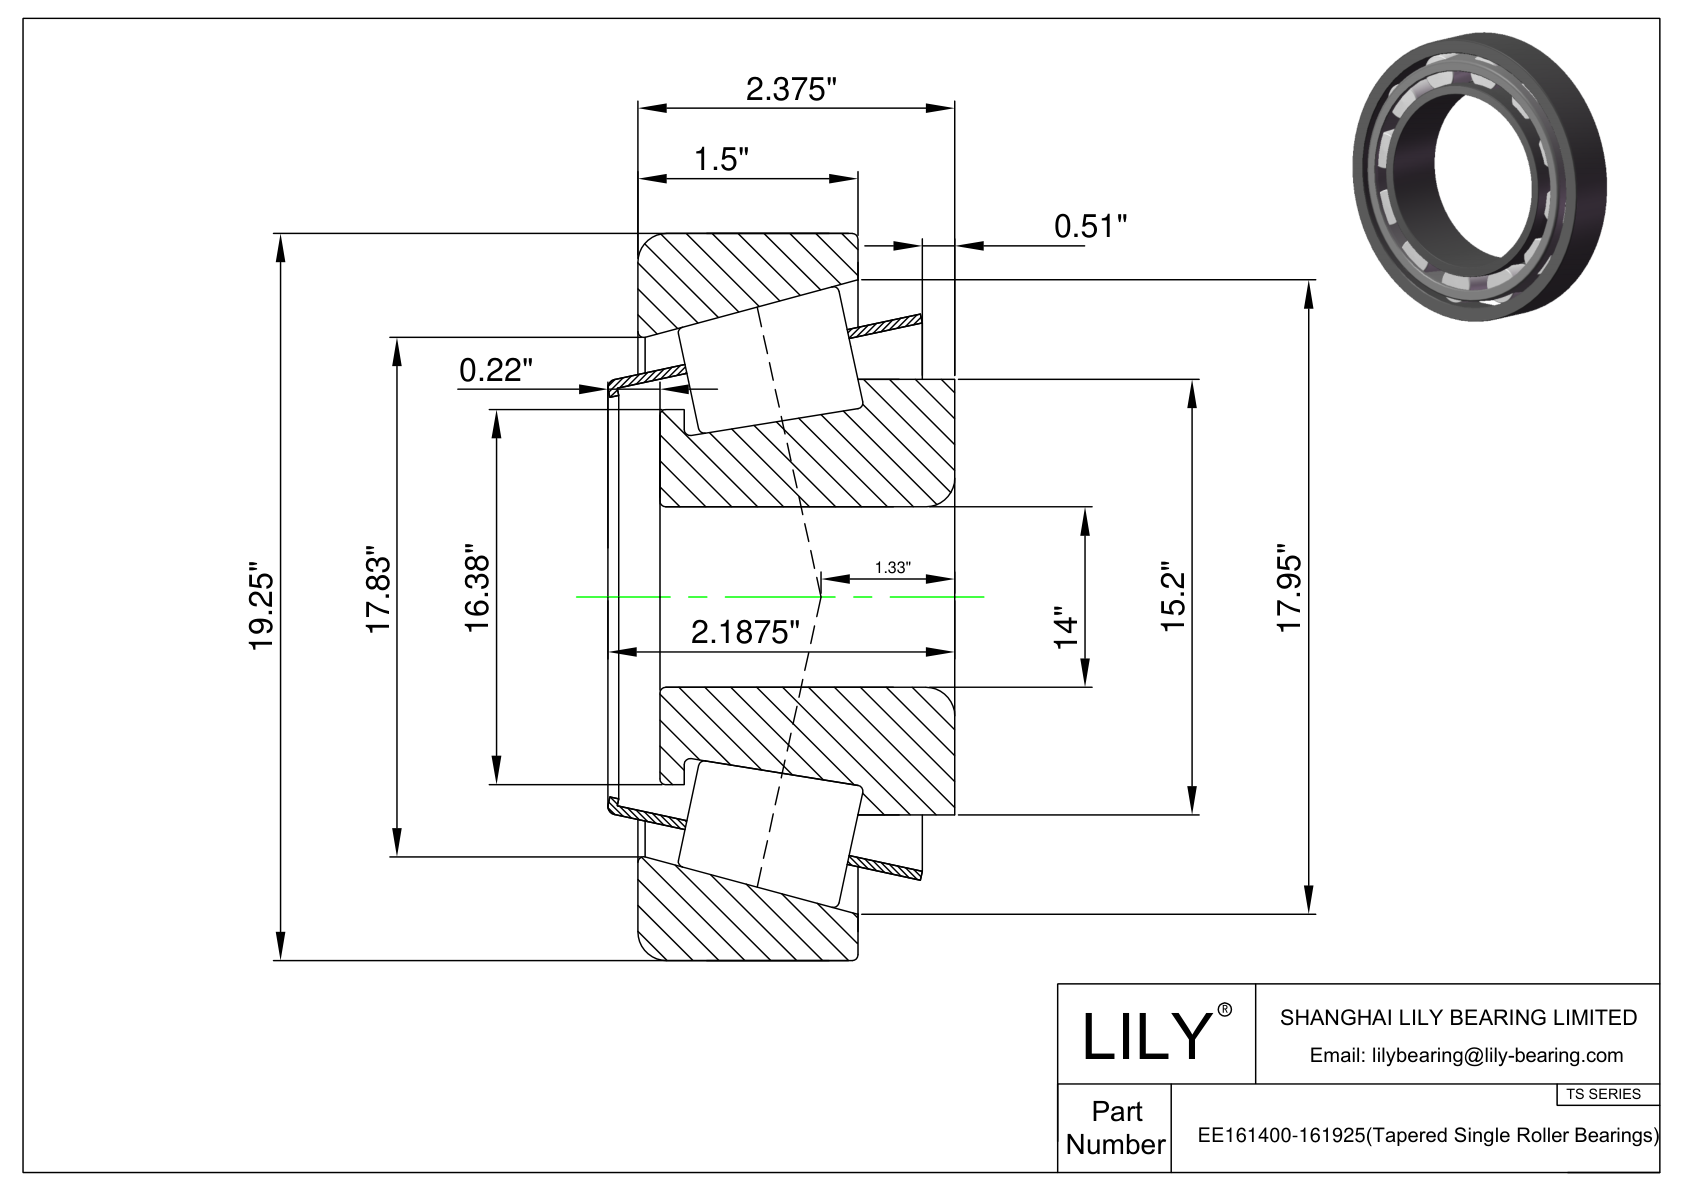 EE161400-161925 TS (Tapered Single Roller Bearings) (Imperial) cad drawing